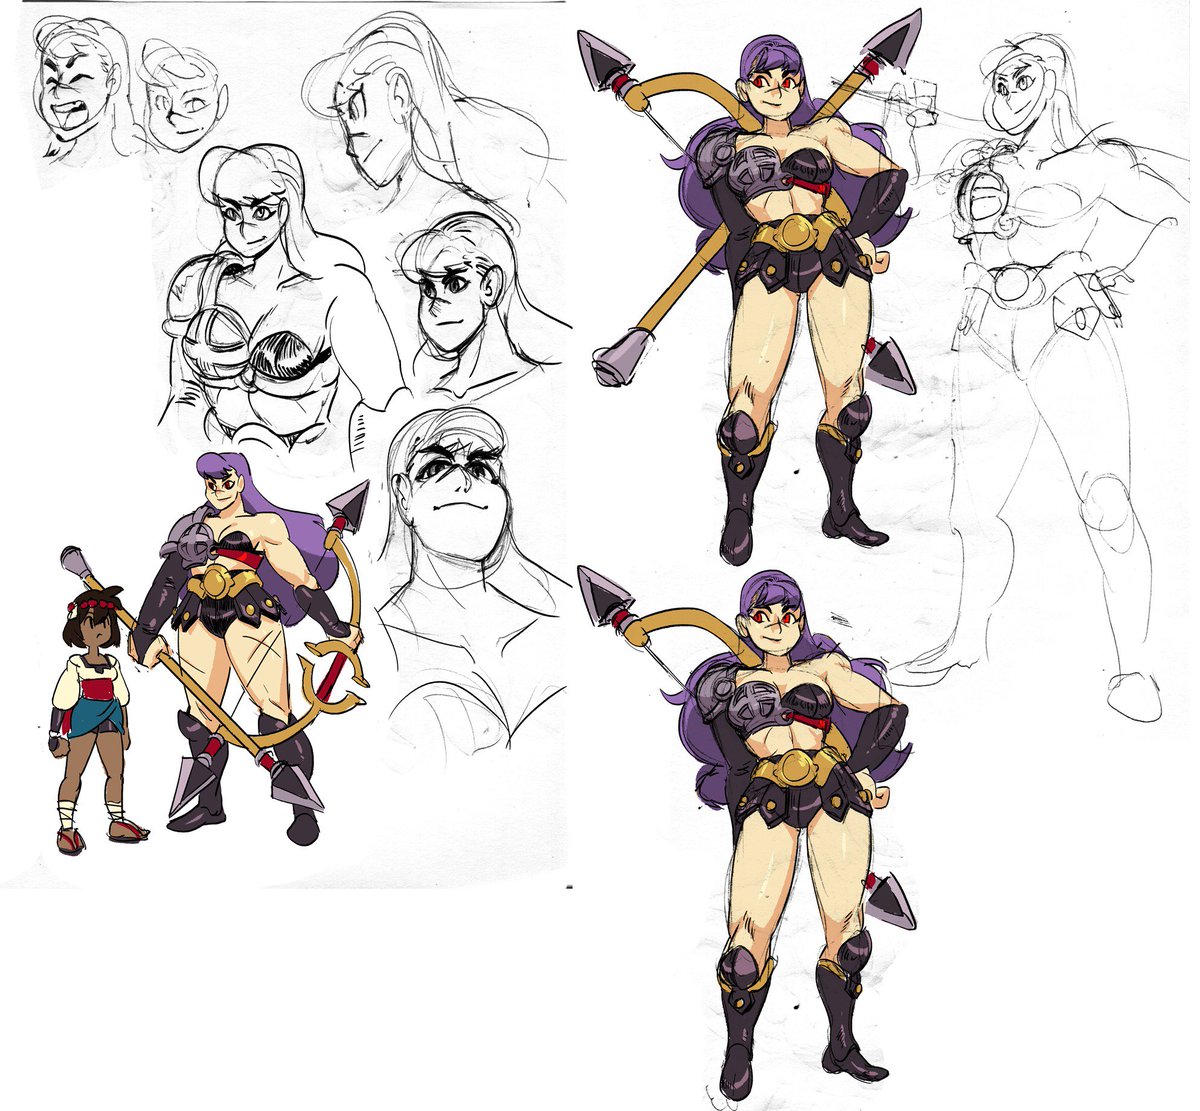 Since Phoebe animations on @IndivisibleRPG , I phigure it'd be phun to post some of the notes / sketches too #PhoebePhriday #indisibleRPG 